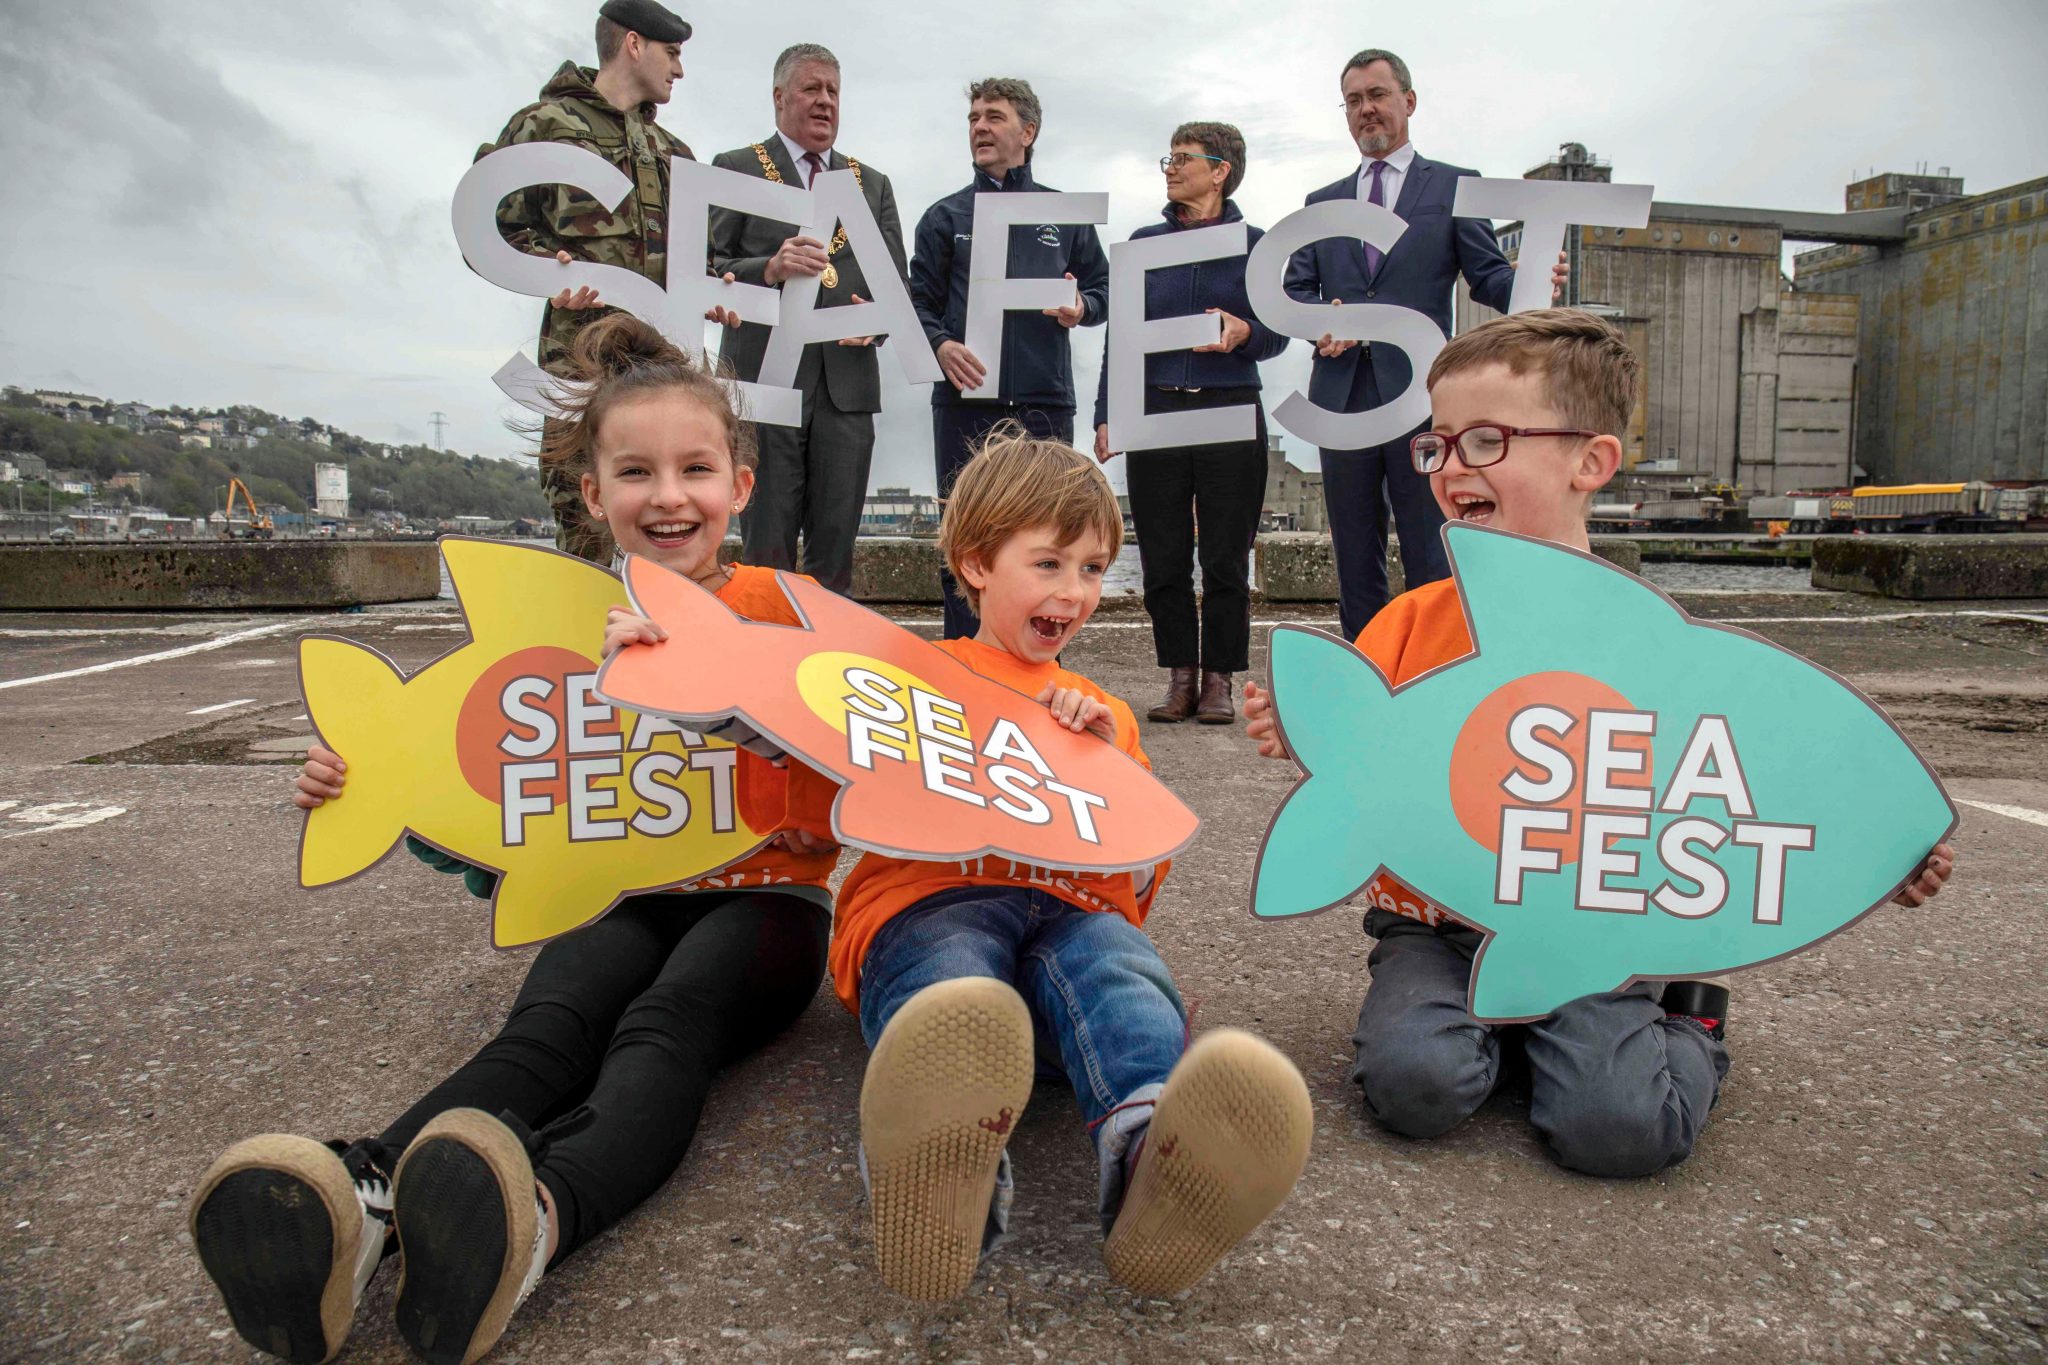 SeaFest Ireland’s largest free maritime festival starts today